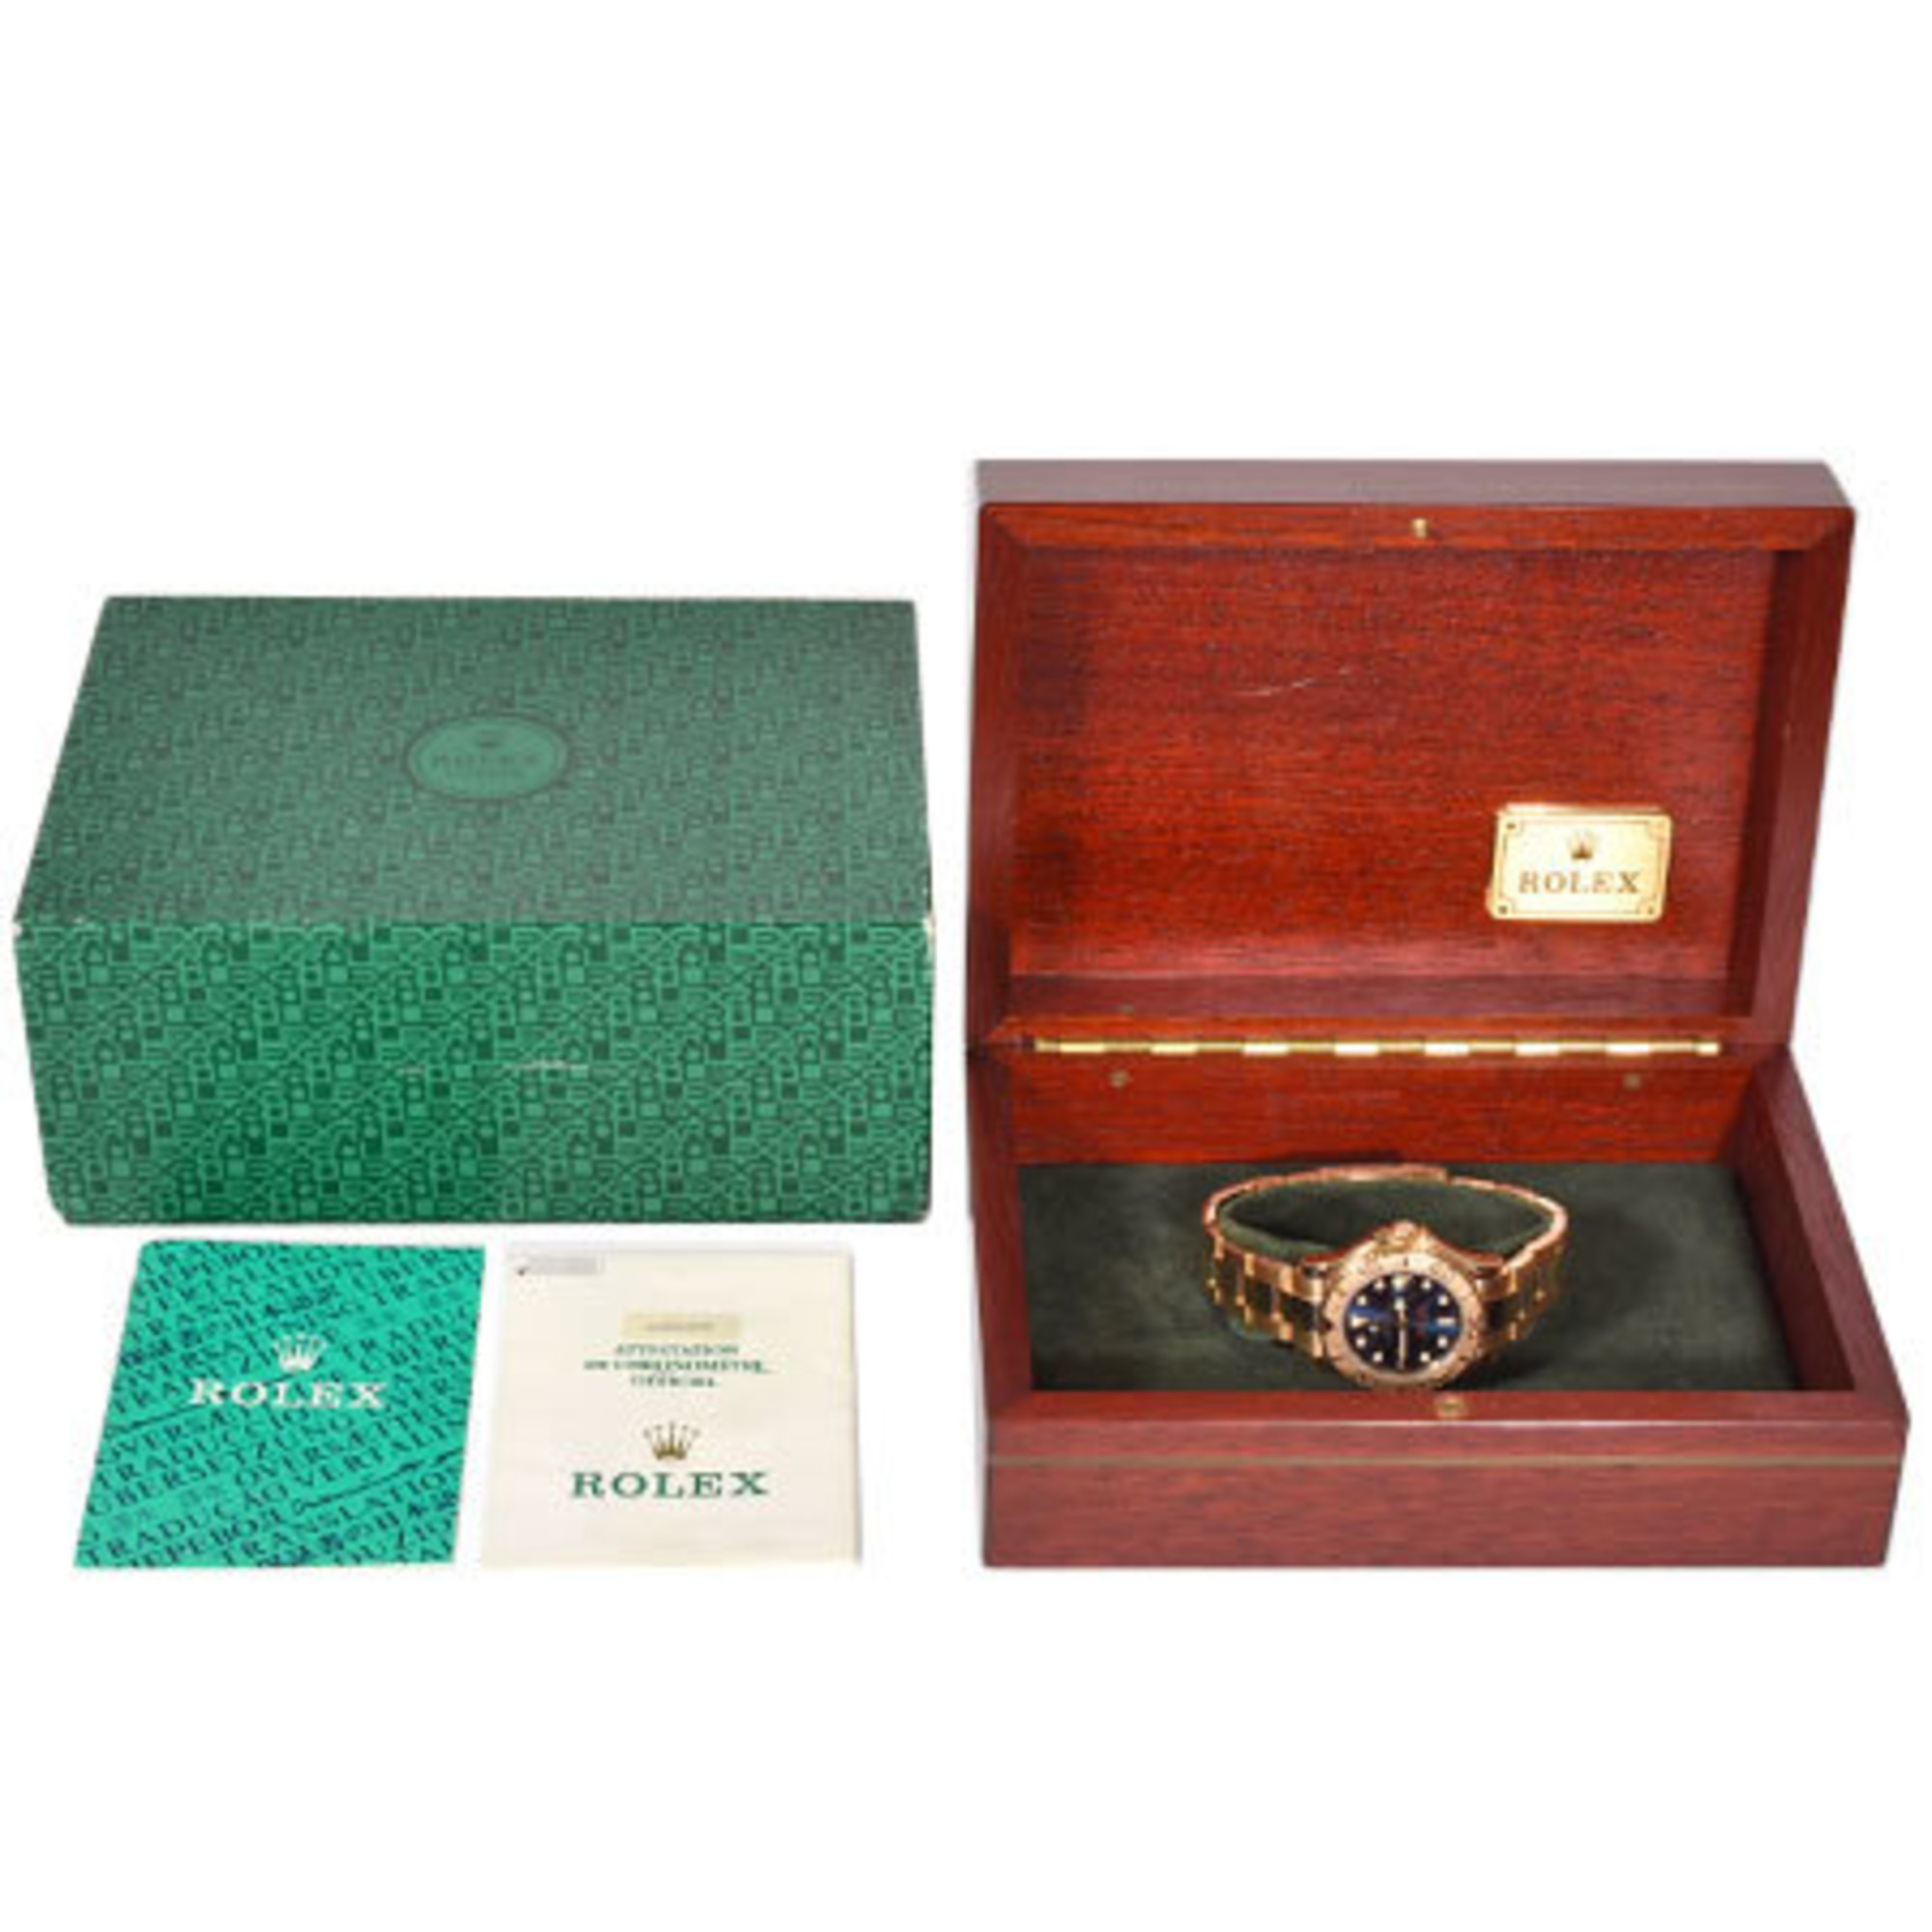 Rolex ROLEX Yacht Master 68628 W No. K18YG Solid Gold Boys Watch Automatic Winding Blue Dial